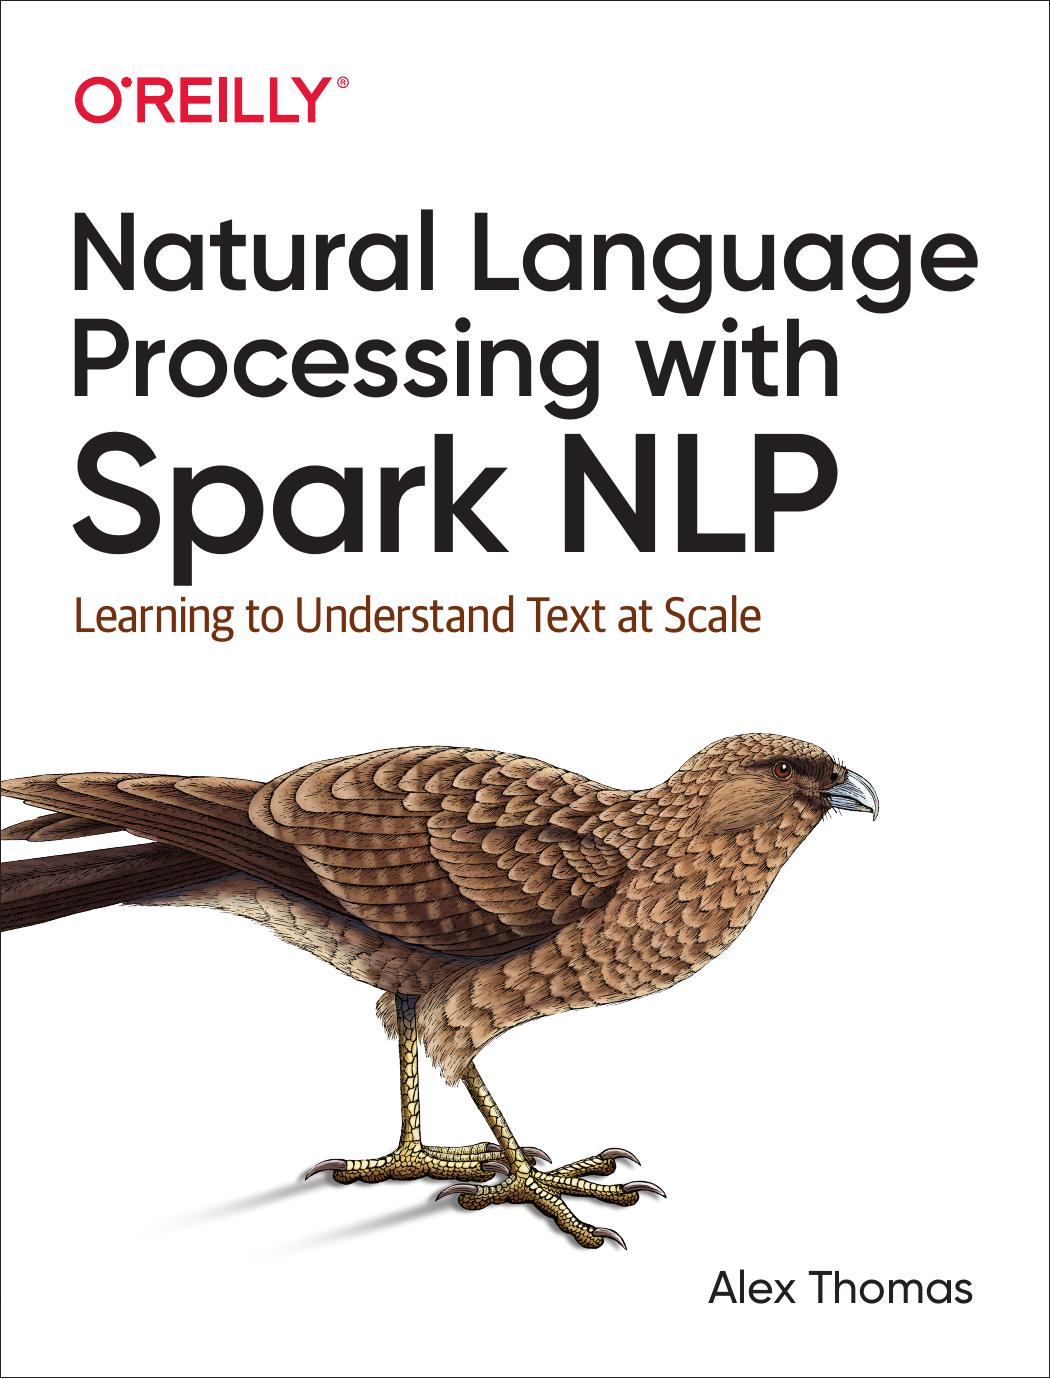 Natural Language Processing with Spark NLP Learning to Understand Text at Scale